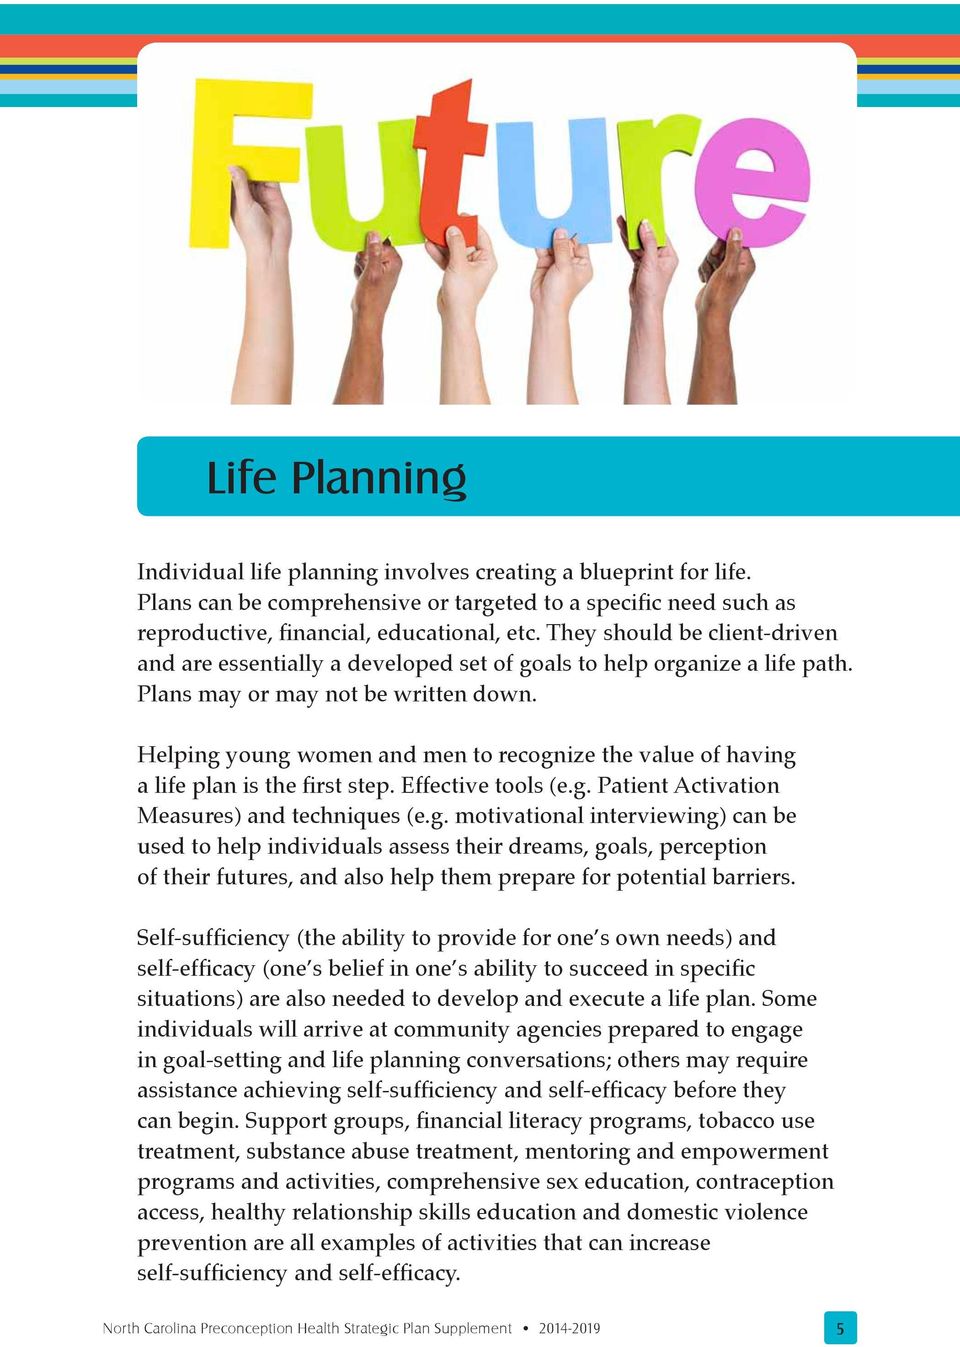 Helping young women and men to recognize the value of having a life plan is the first step. Effective tools (e.g. Patient Activation Measures) and techniques (e.g. motivational interviewing) can be used to help individuals assess their dreams, goals, perception of their futures, and also help them prepare for potential barriers.